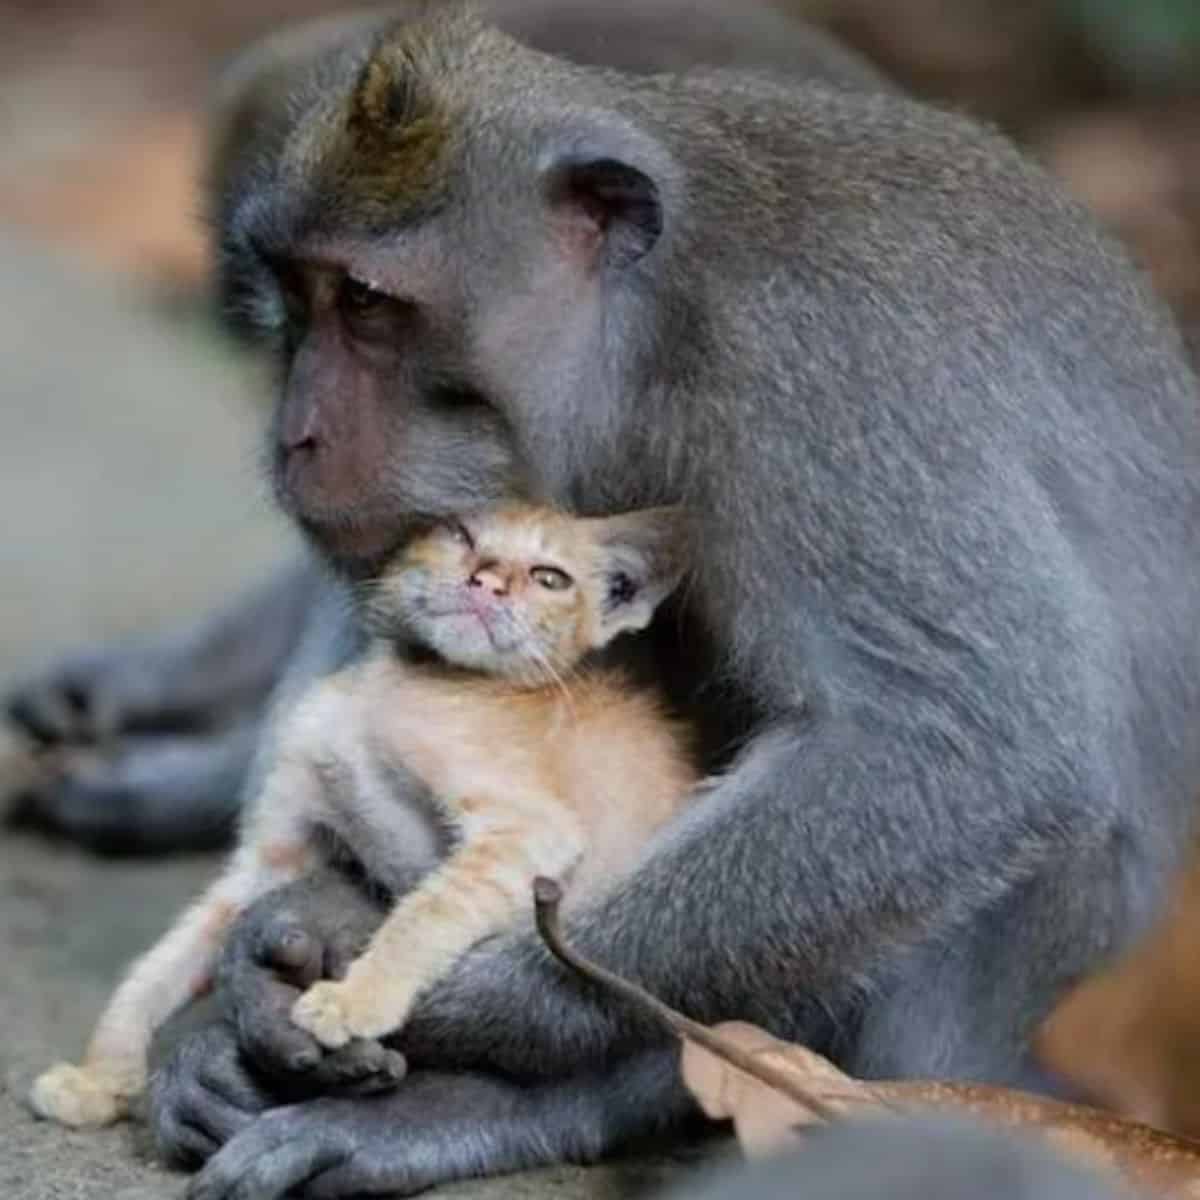 the monkey is holding the kitten in its arms, resting its head on his